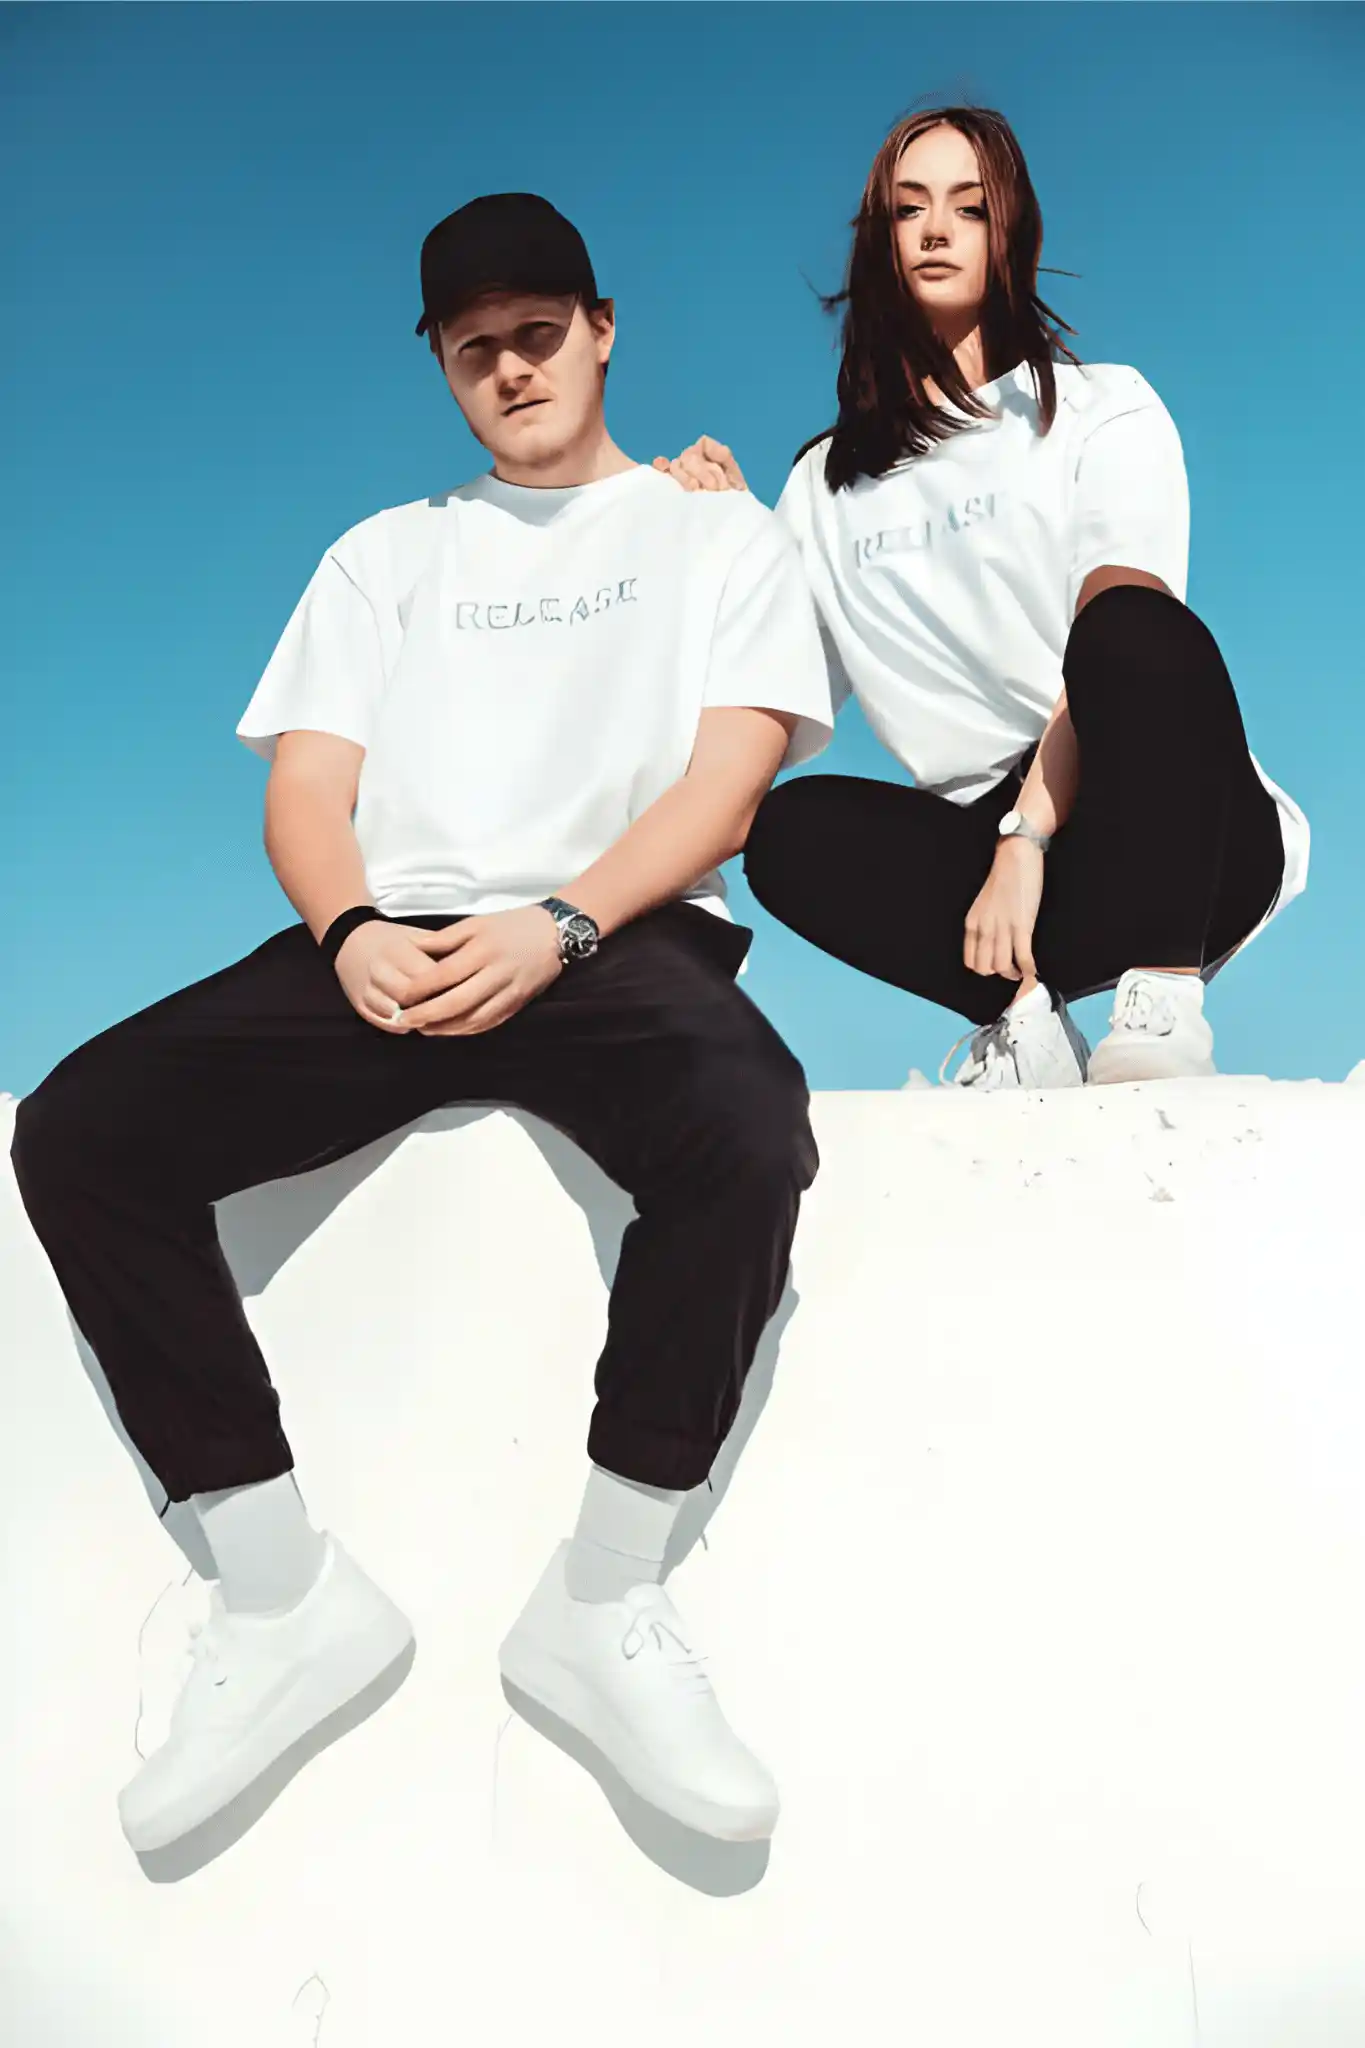 A young man and a girl wearing white T-shirts are sitting.